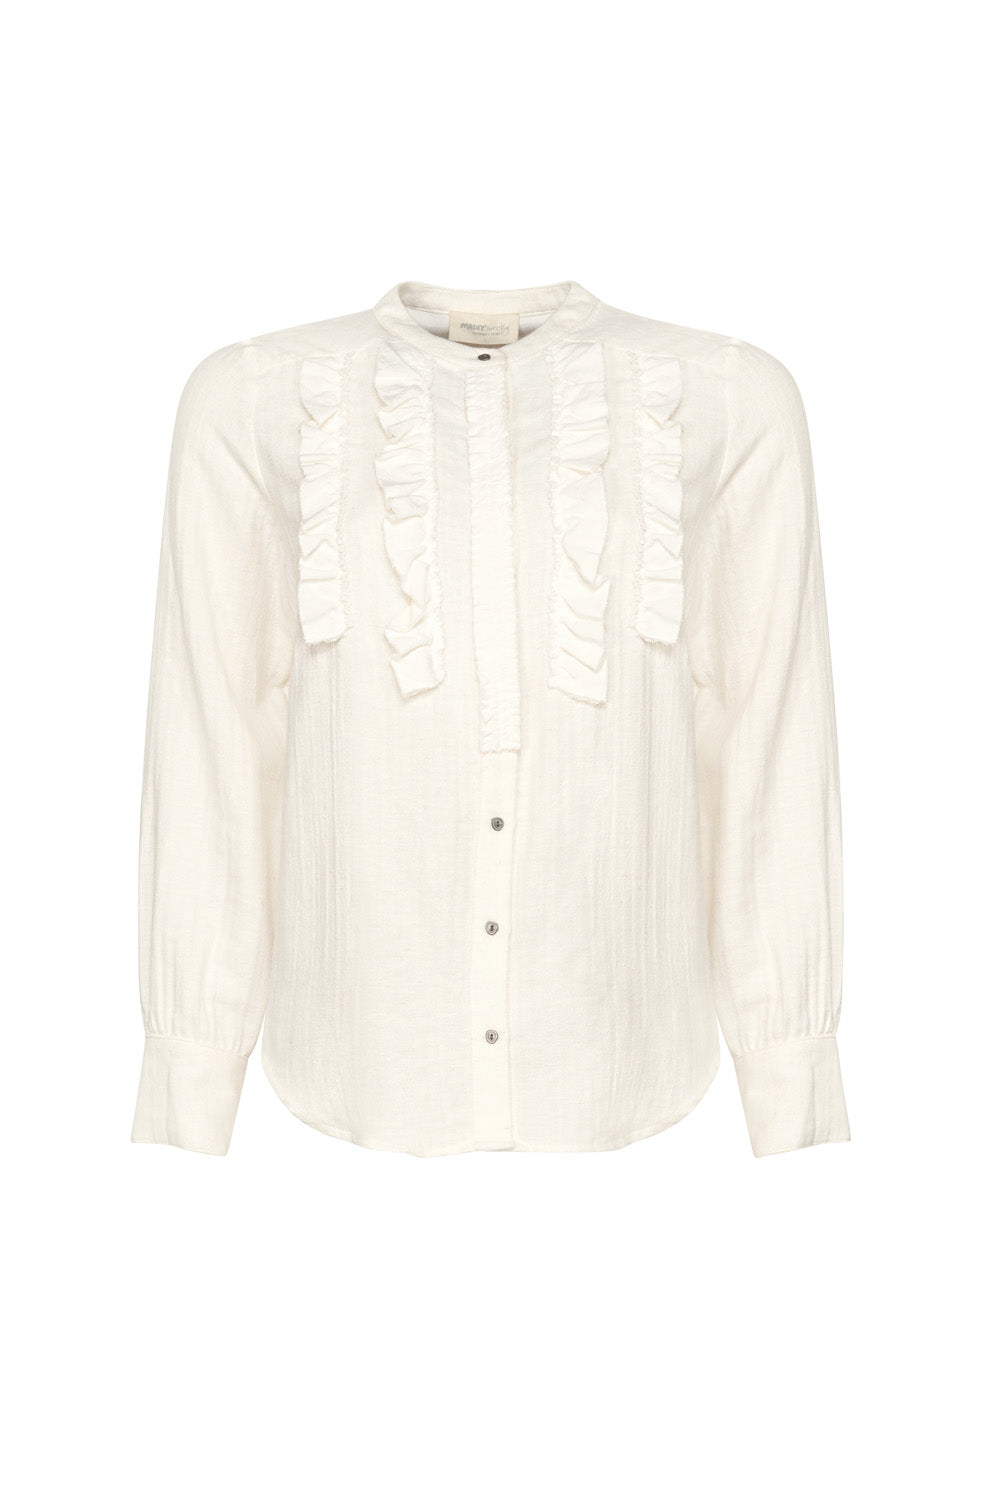 MADLY SWEETLY COTTON TALE SHIRT - WINTER WHITE - THE VOGUE STORE